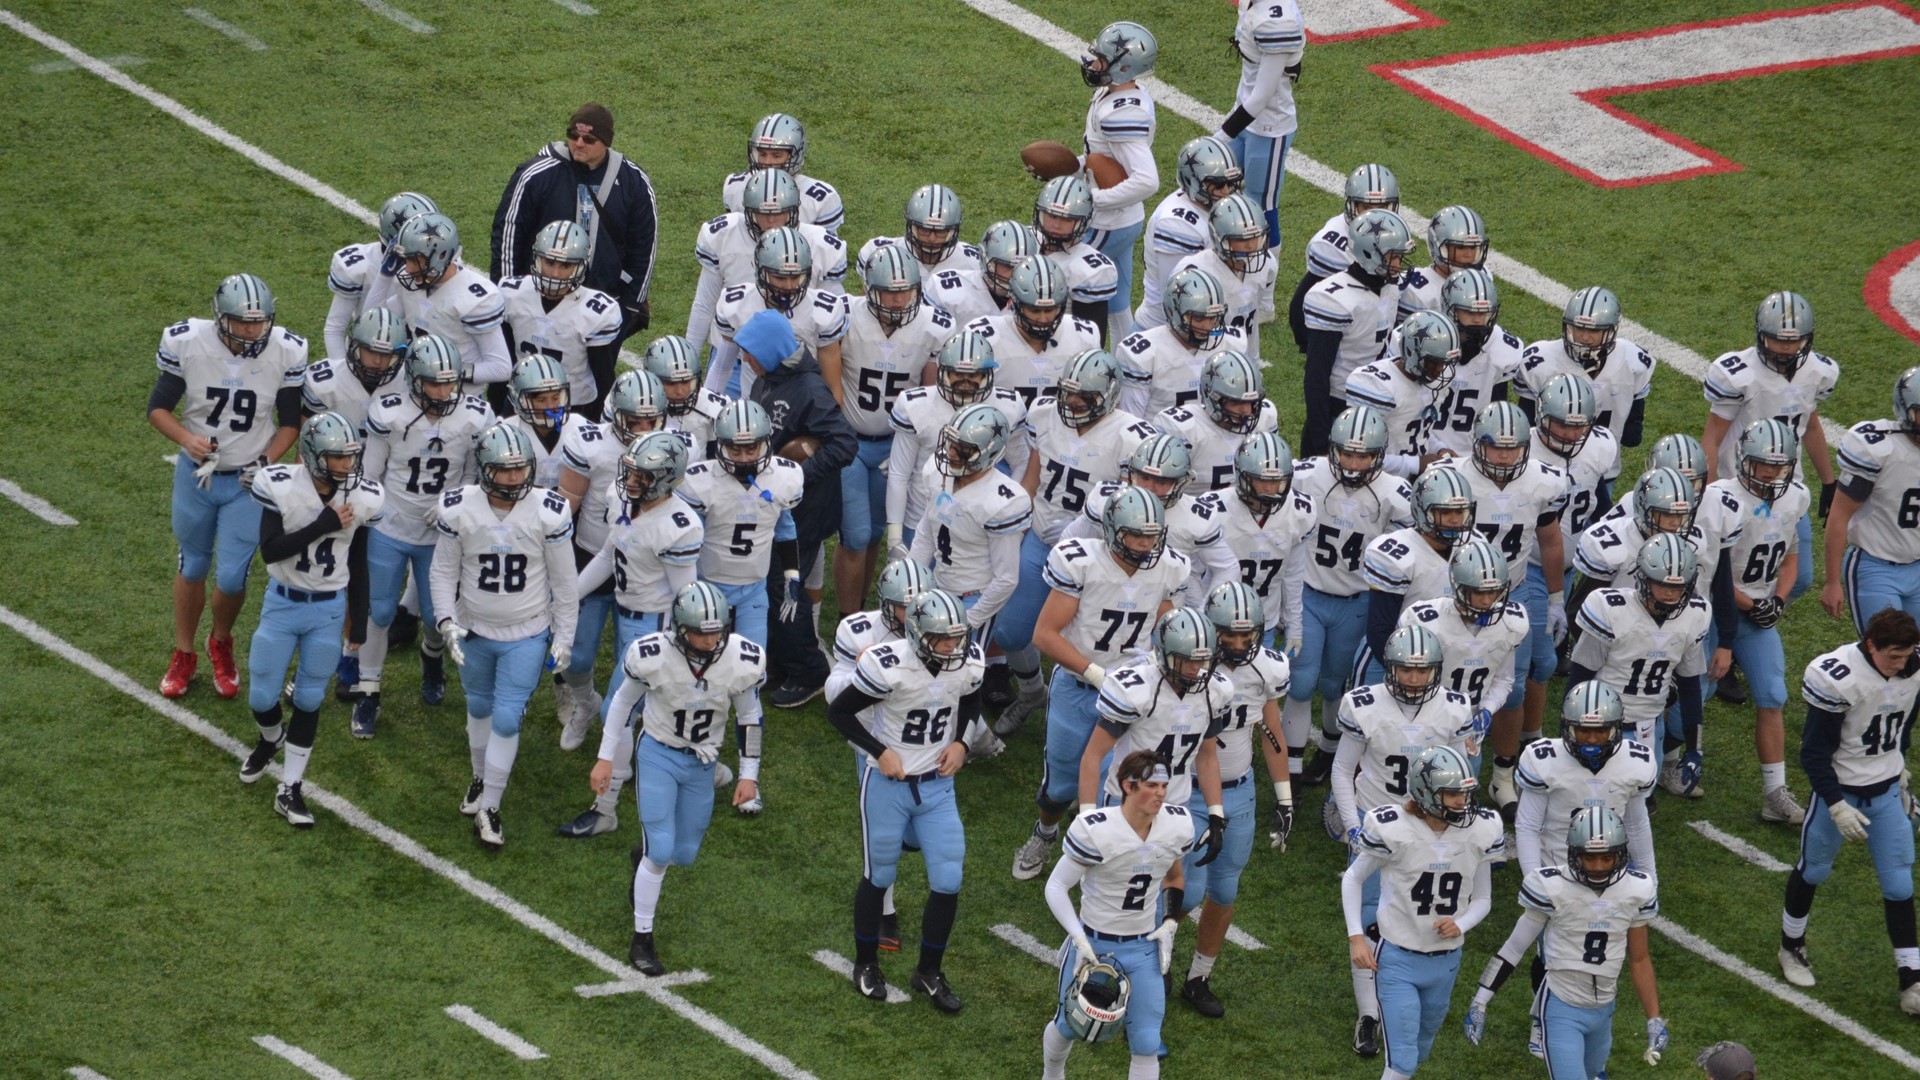 PHOTOS: Kenston Bombers earn first-ever State Championship with 42-6